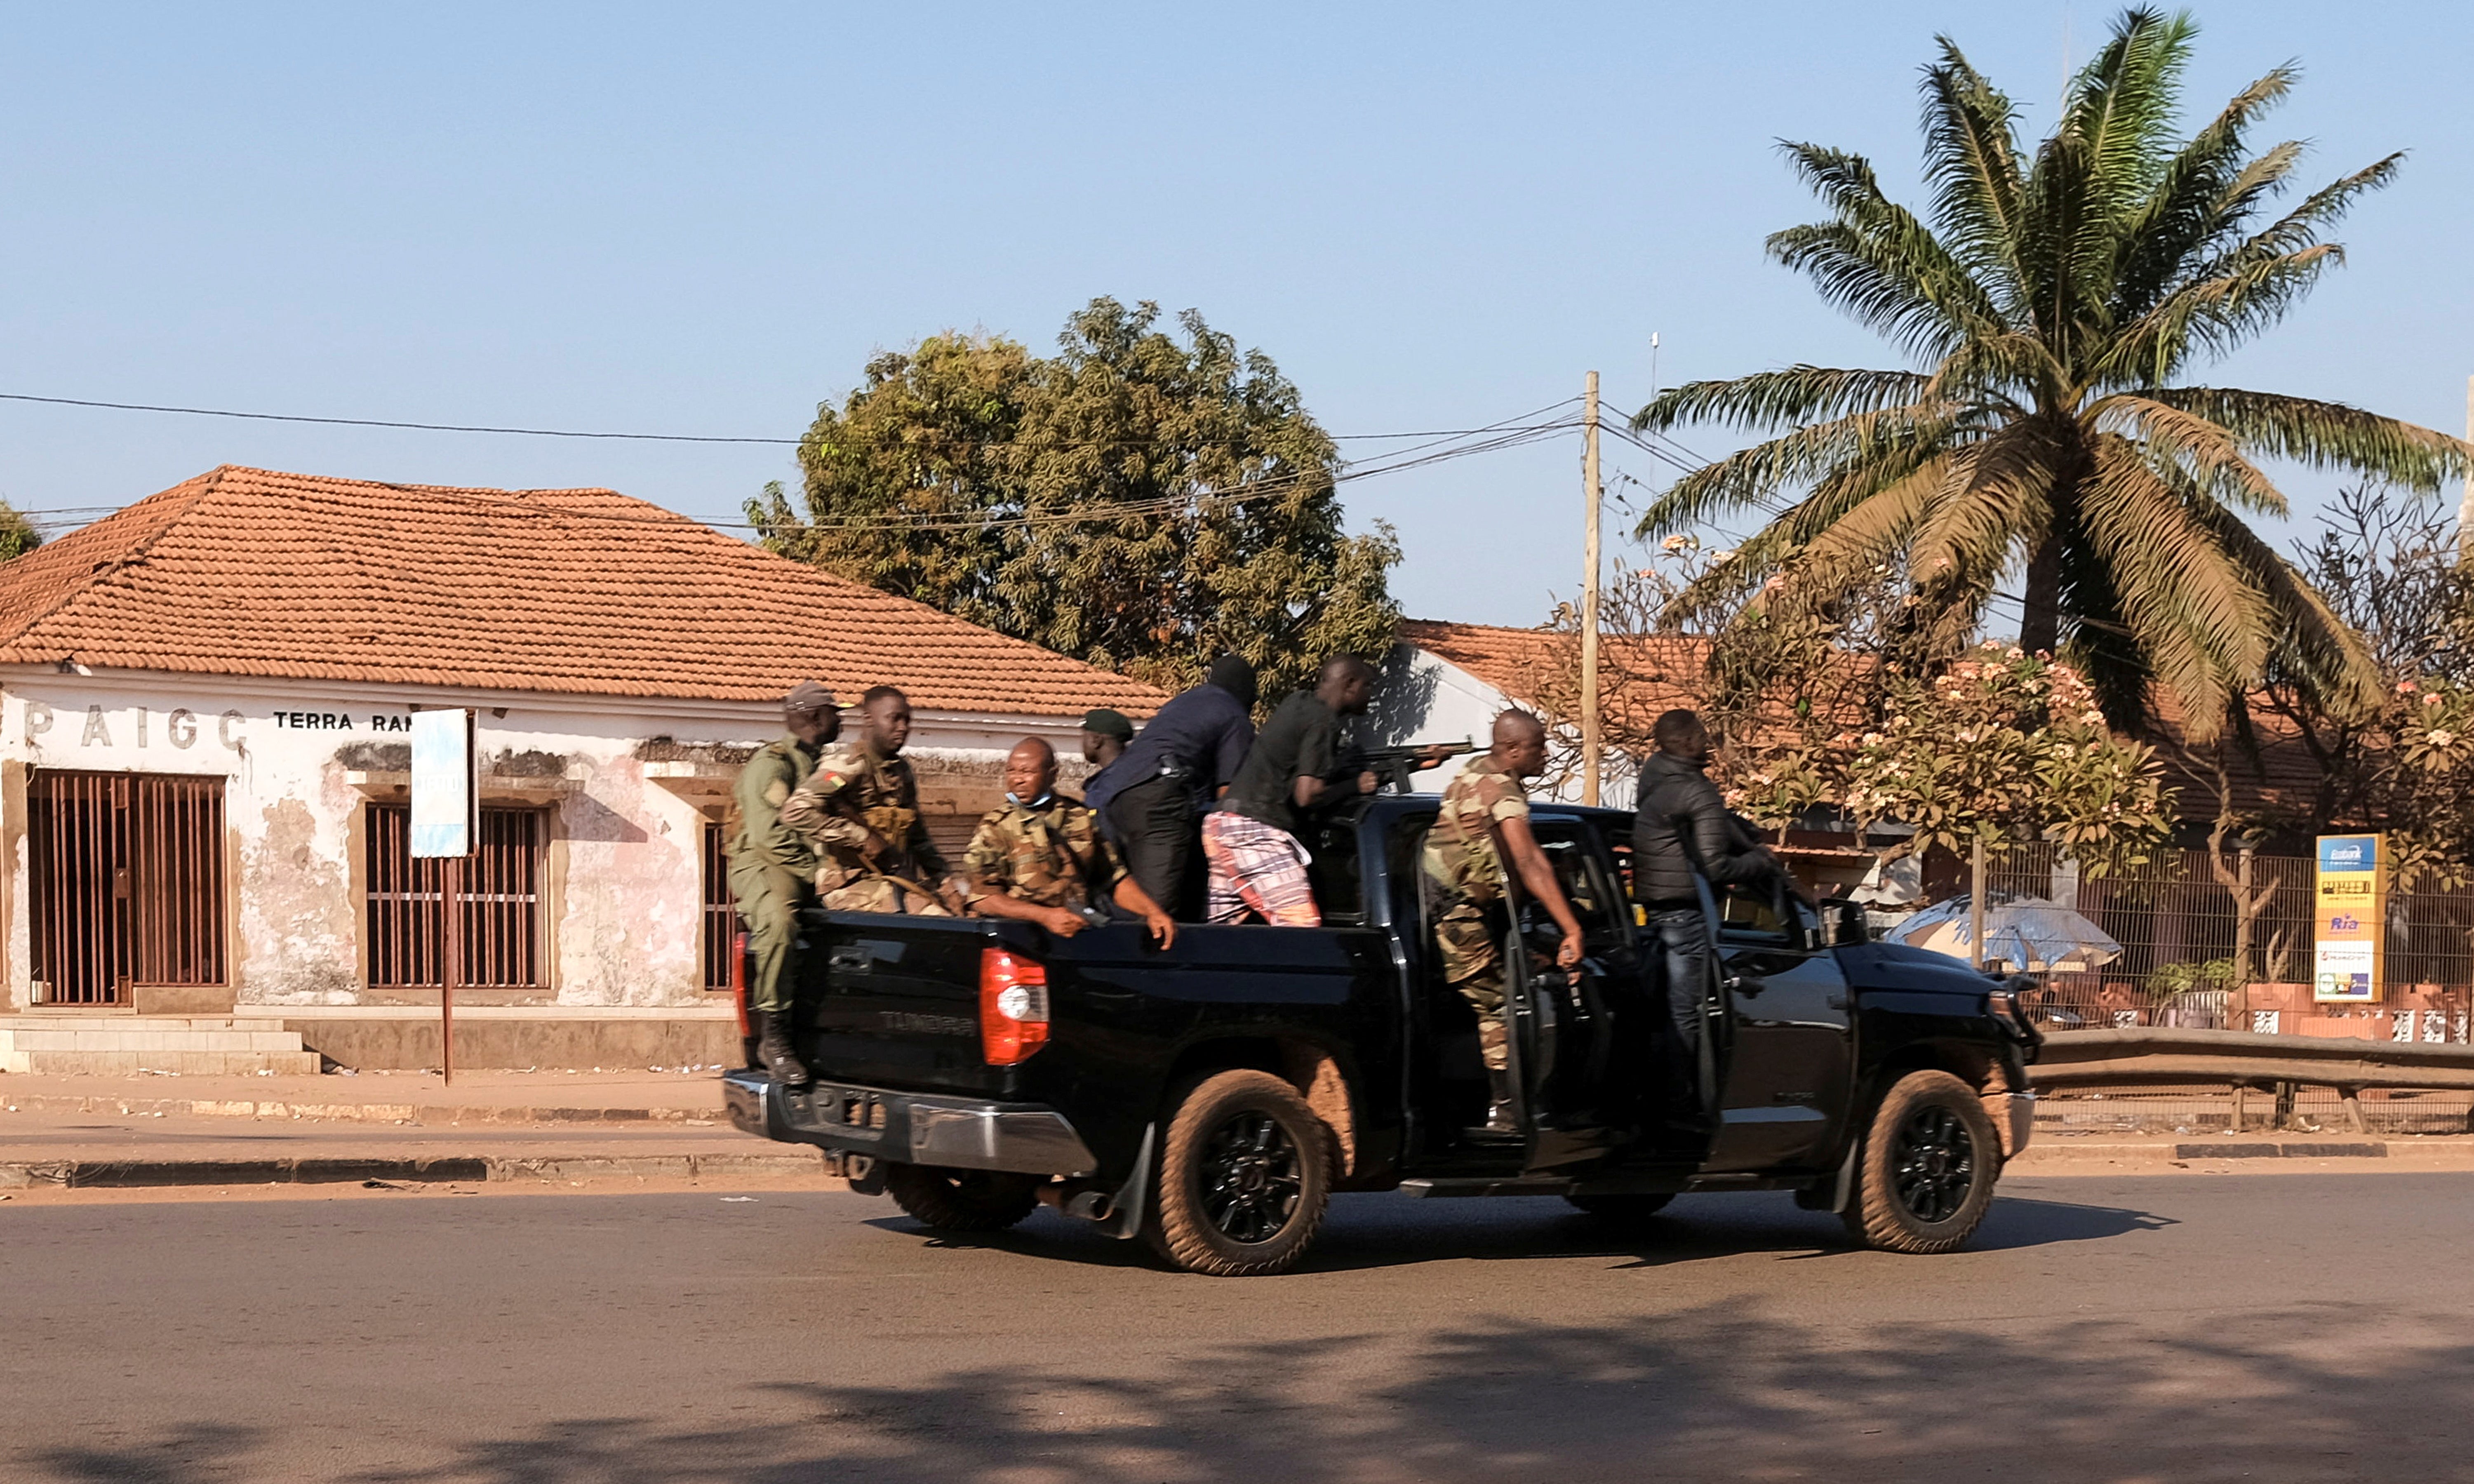 Armed soldiers move on the main artery of the capital after heavy gunfire around the presidential palace in Bissau, Guinea Bissau, 1 February 2022